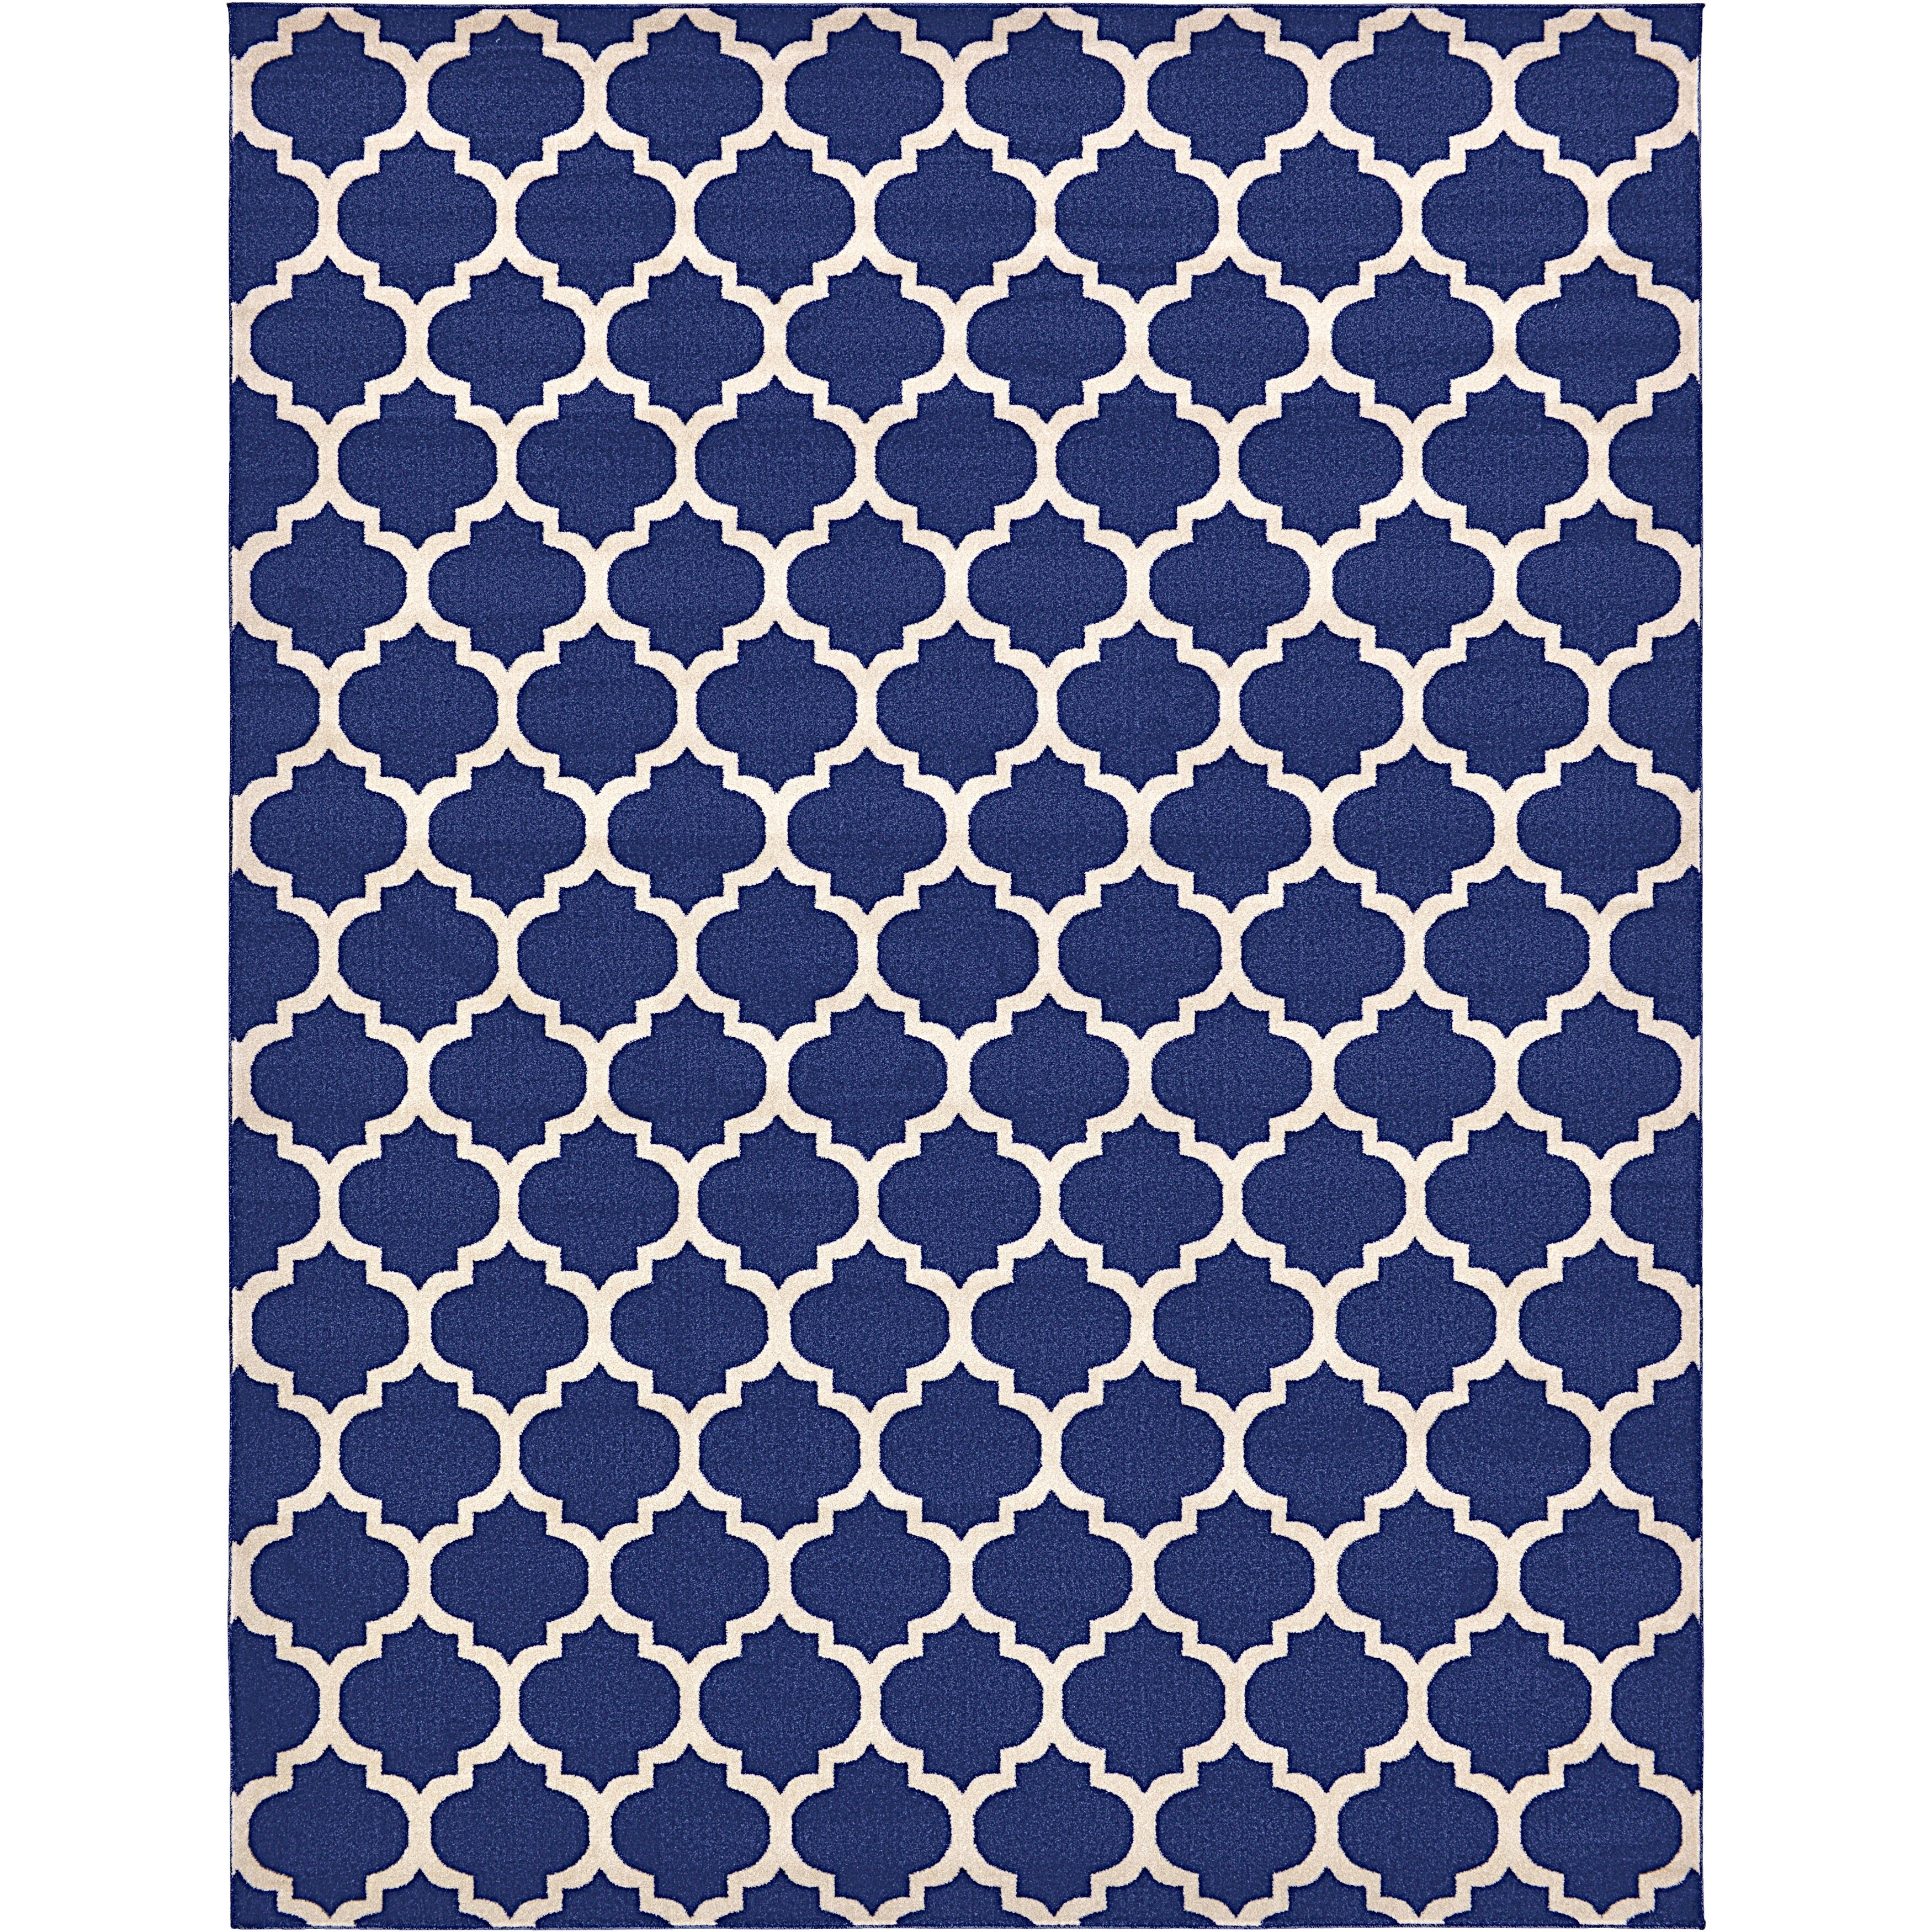 Buy Blue Geometric Area Rugs Online At Overstockcom Our Best